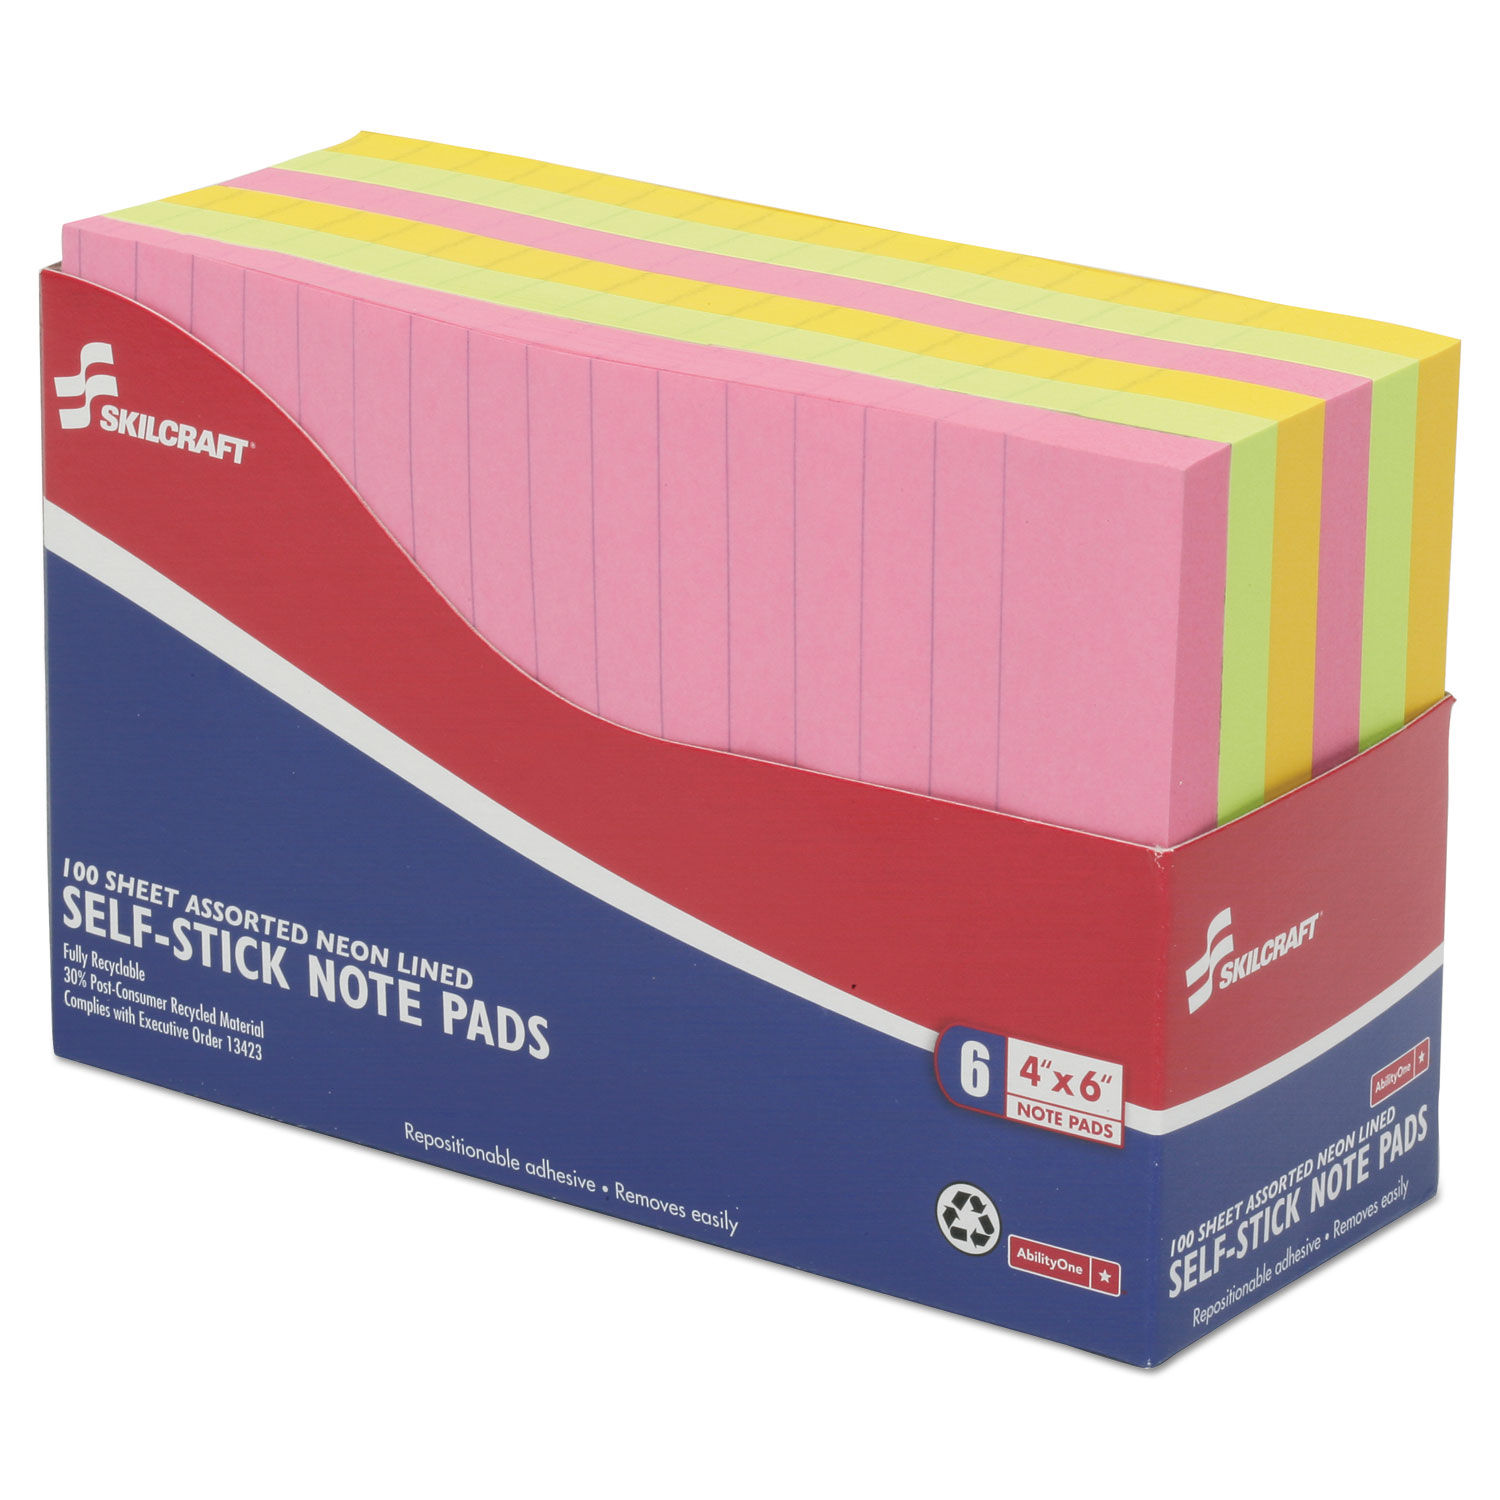 SKILCRAFT Self-Stick Note Pads, Note Ruled, 4 x 6, Assorted Neon Colors,  100 Sheets/Pad, 6 Pads/Pack, GSA 753001418121